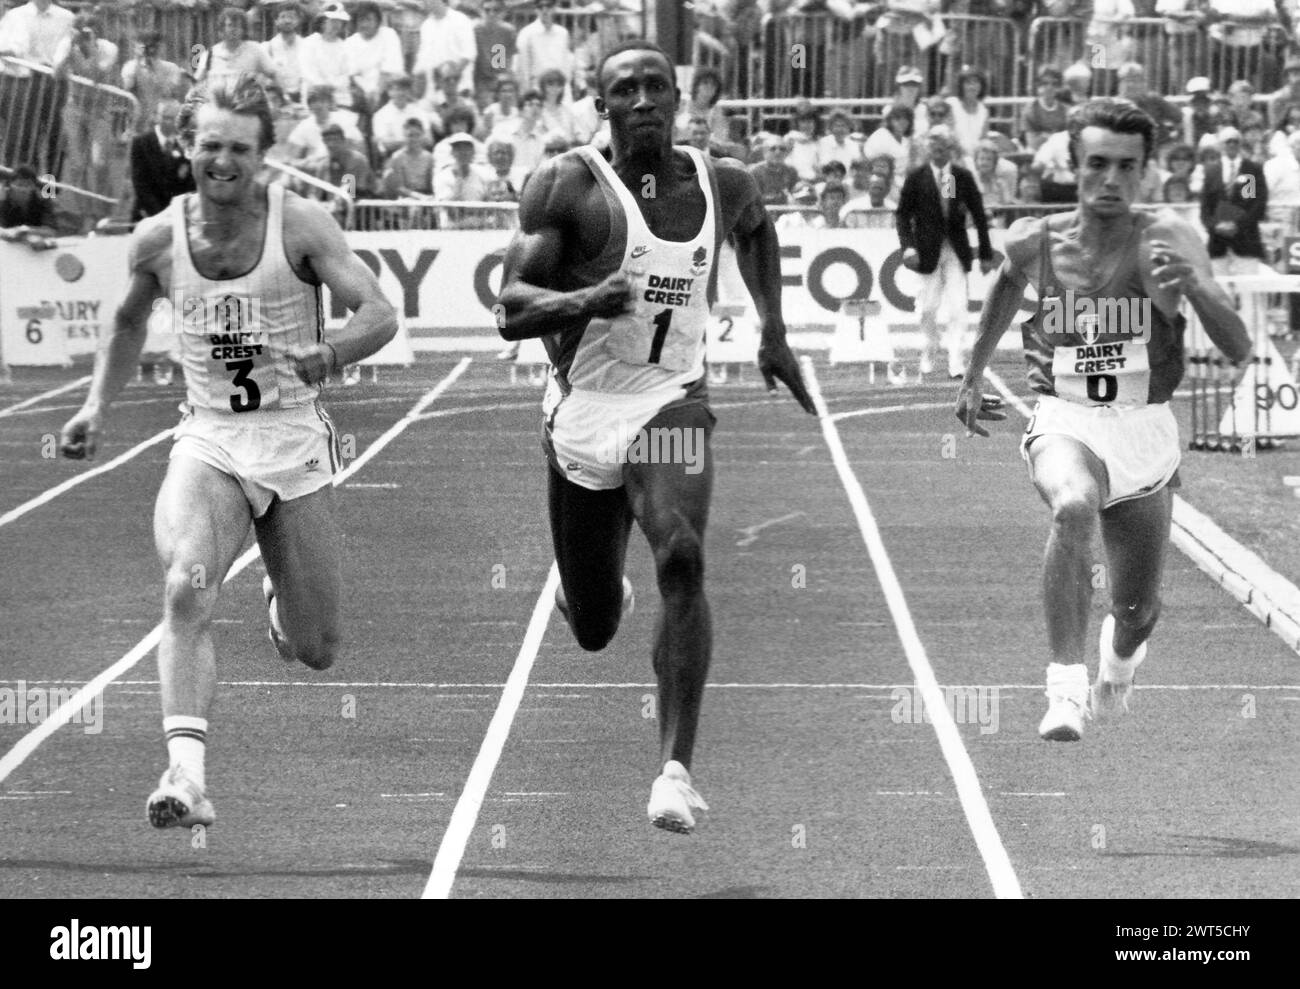 LINFORD CHRISTIE 100 METRI IN COMPETIZIONE AL GUARDIAN ROYAL EXCHANGE MEETING ATHLETICS ALL'ALEXANDRA PARK, PORTSMOUTH, 1987 PIC MIKE WALKER 1987 Foto Stock